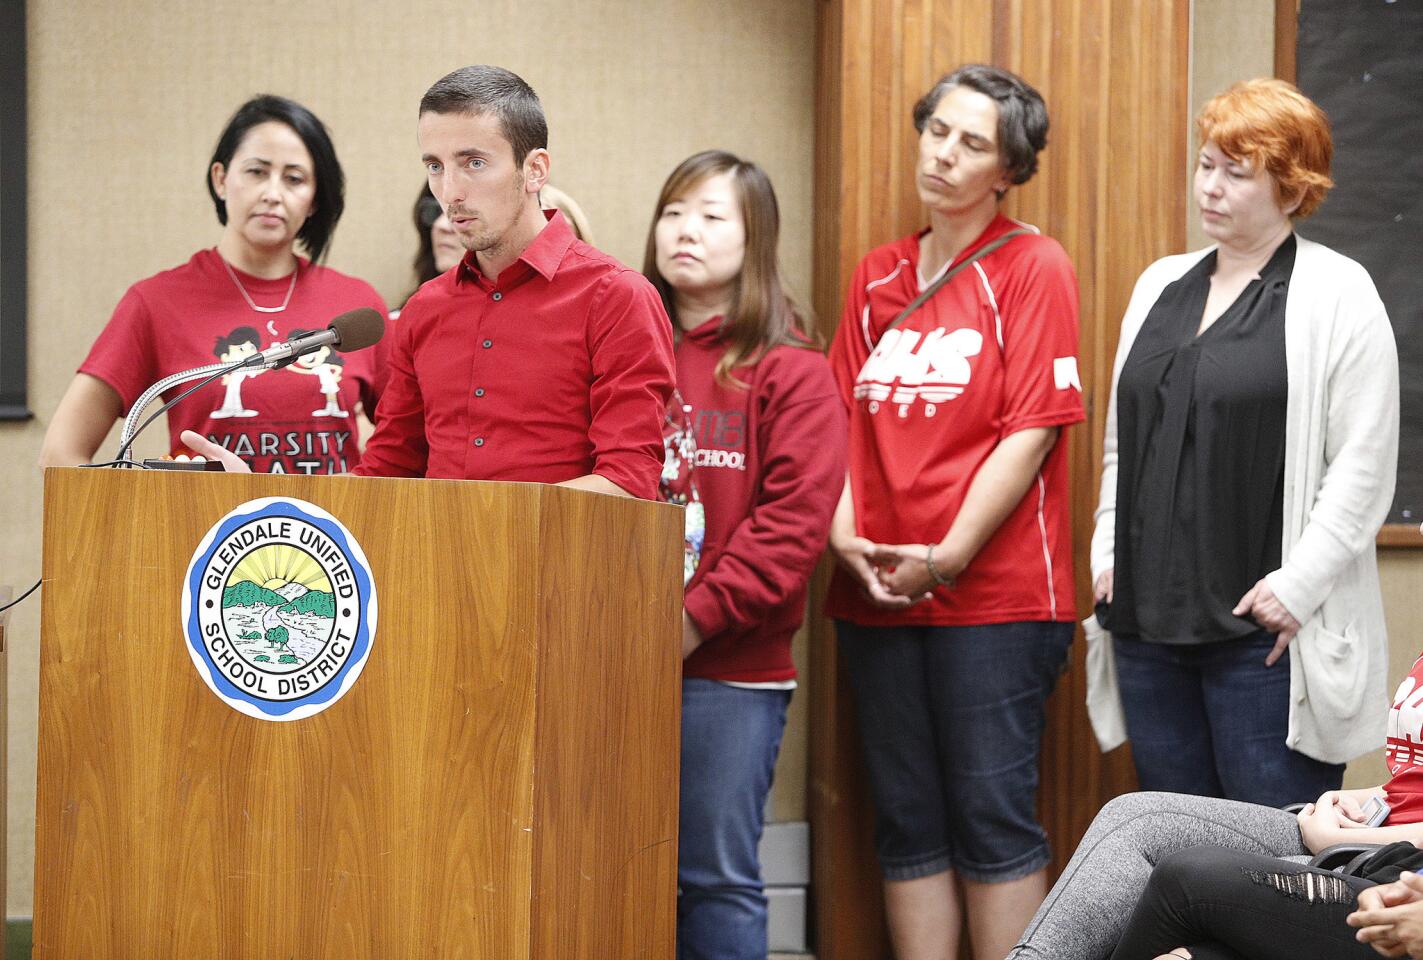 Glendale High School teacher Narek Vardanian, with fellow math teachers behind him, voice strong support for CPM math at a school board meeting to decide which district-wide math curriculum schools will use for instruction next year in Glendale on Monday, June 4, 2018. After pushing the controversial vote about whether to use the HMH math curriculum or CPM for several sessions, the school board voted 5-0 to reject the CPM recommendation by the GUSD staff.